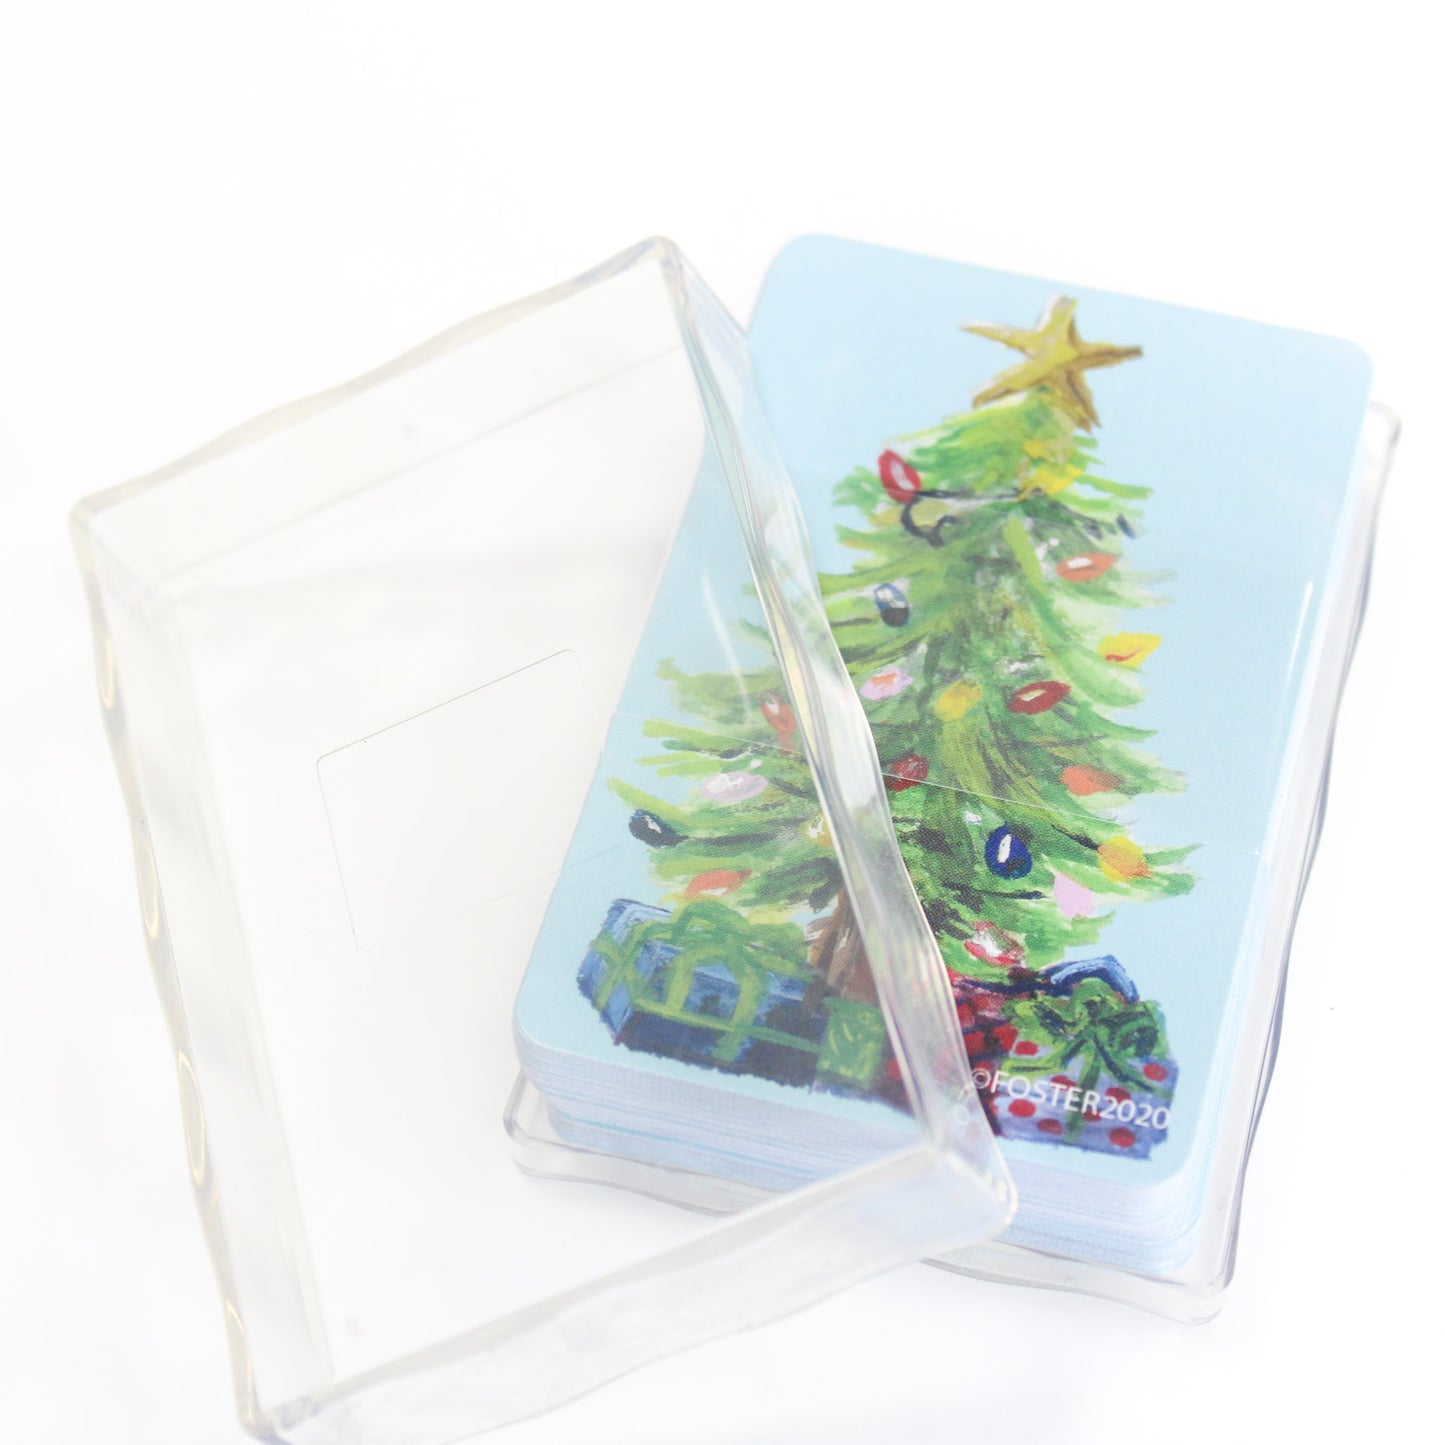 Unique Christmas Playing Cards by FOSTER, great stocking stuffers and holiday gifts